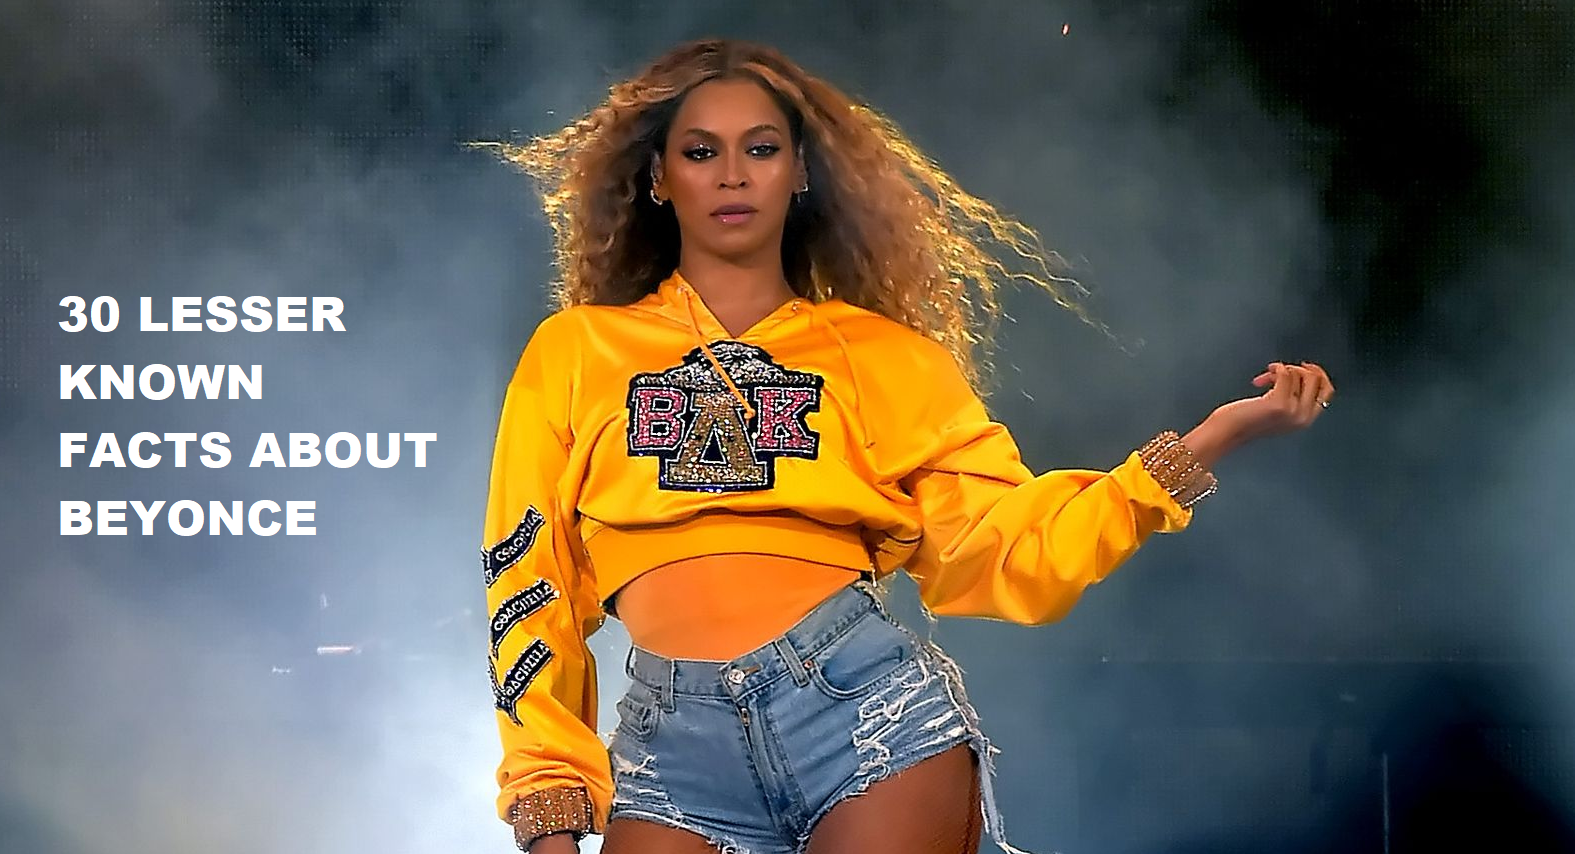 Lesser known facts about Beyonce